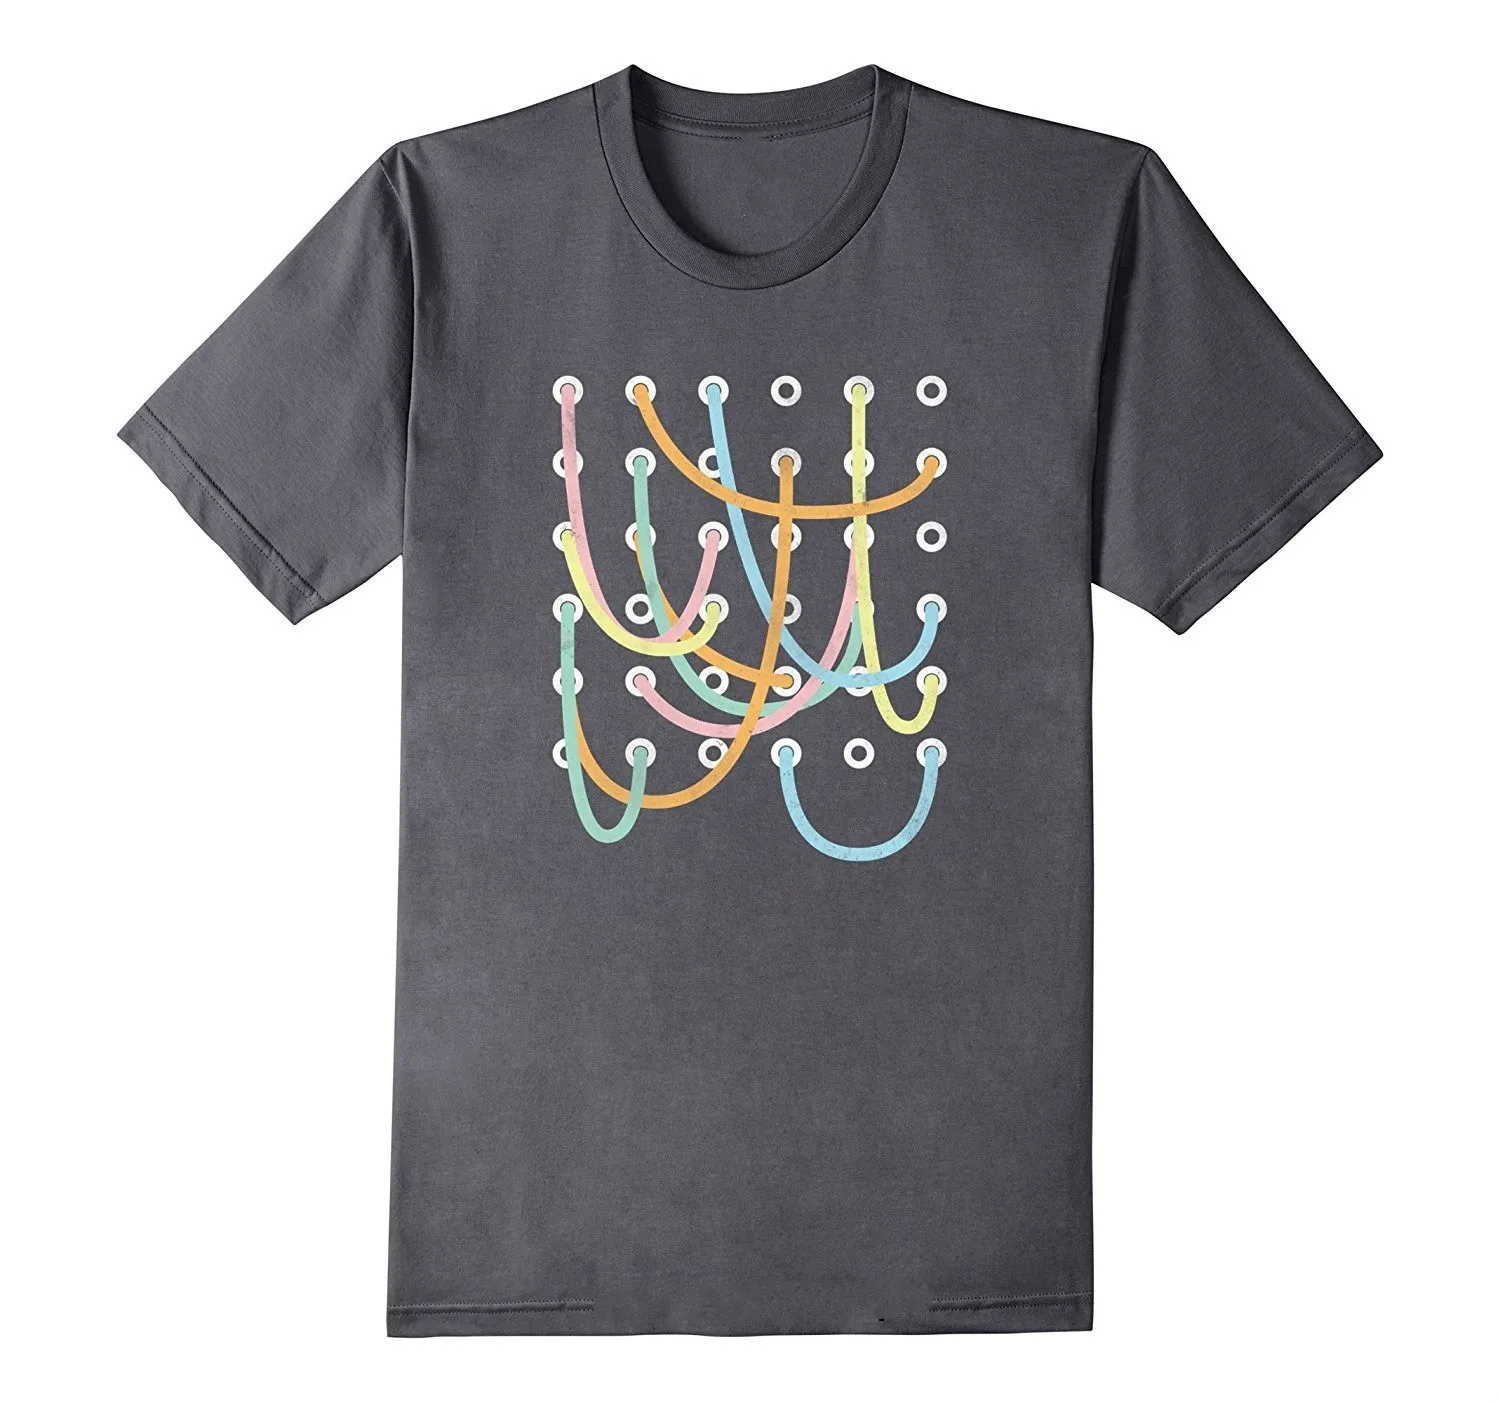 

Modular Synthesizer Patch Cable Patchbay Audio Nerd T-Shirt 100% Cotton looser Short Sleeve T-Shirt For Men